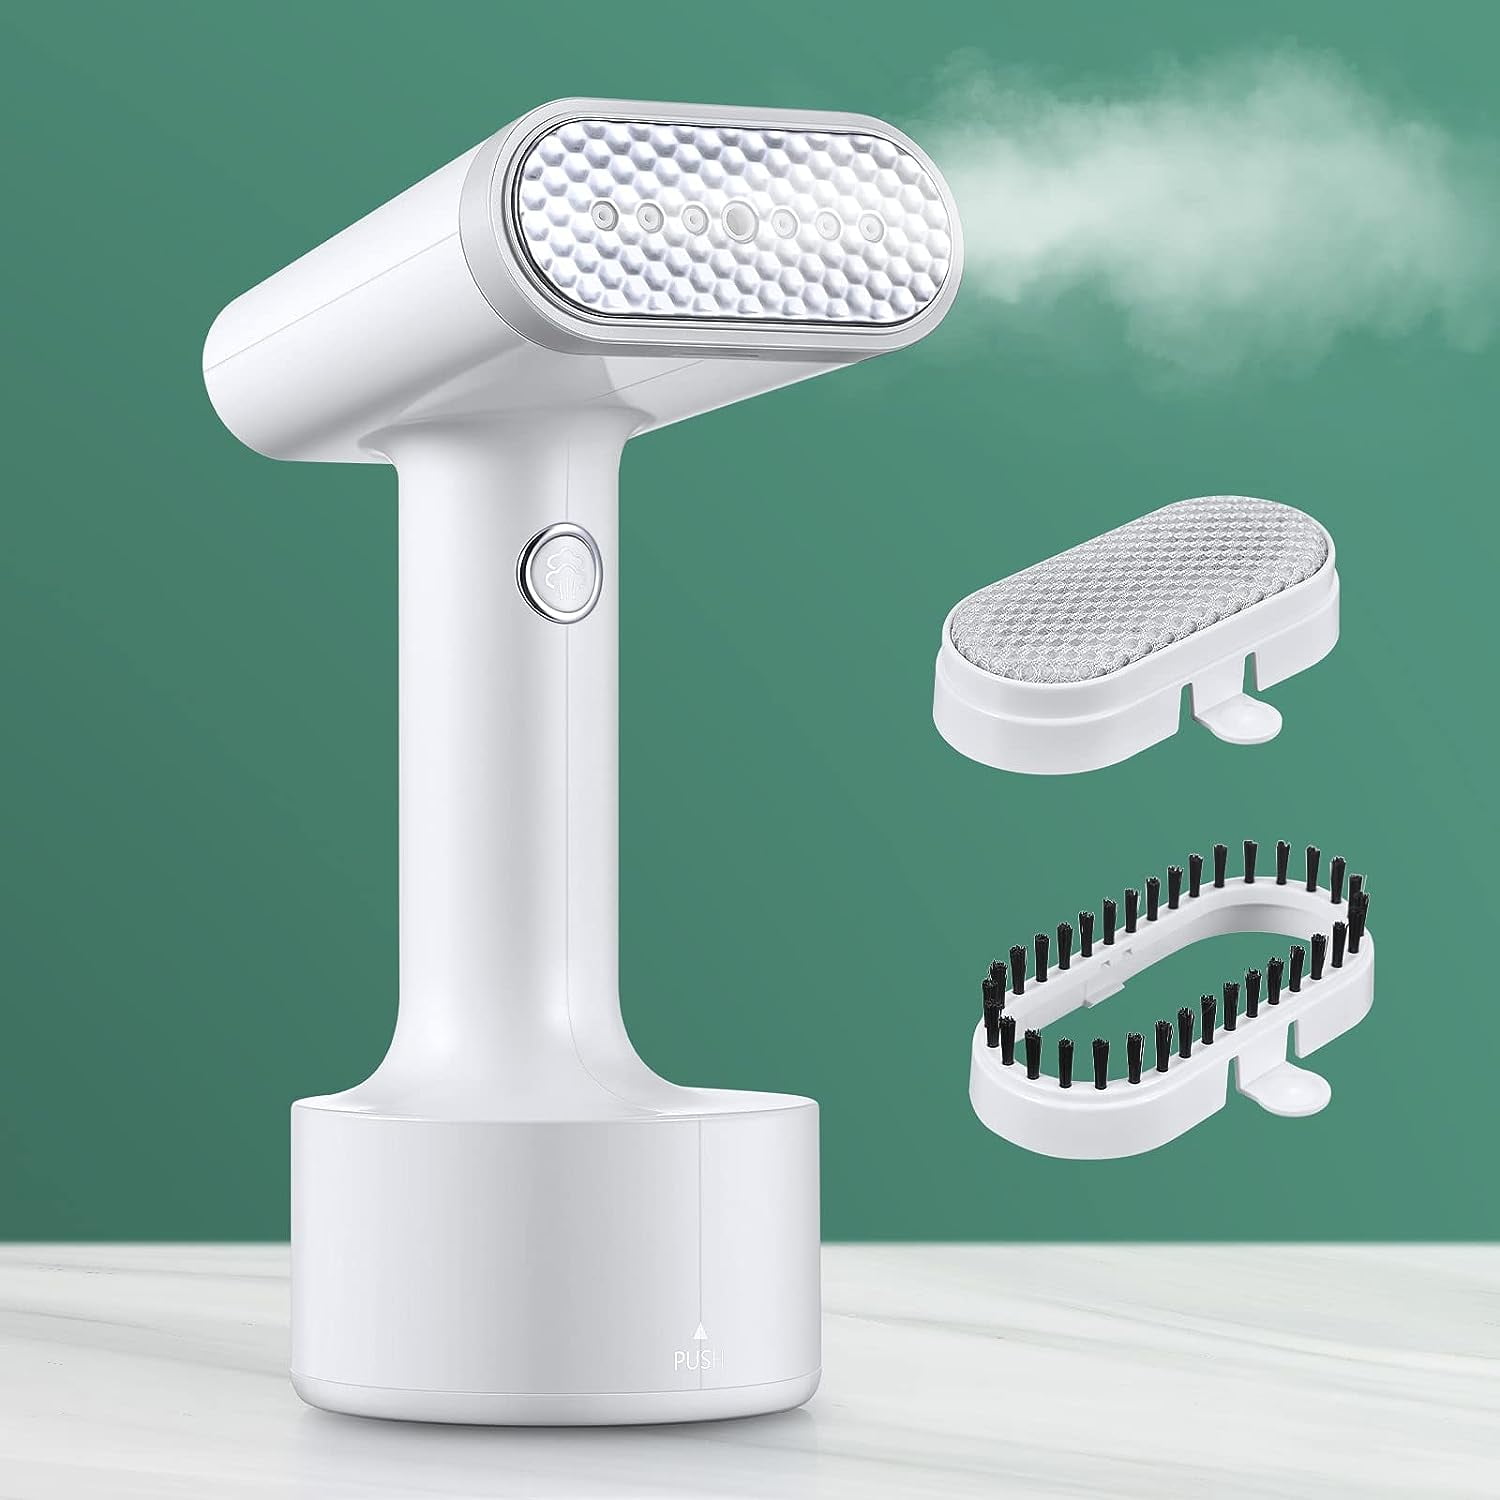 Aiheal Steamer for Clothes, Portable Garment Steamer for Travel, 1200W ...